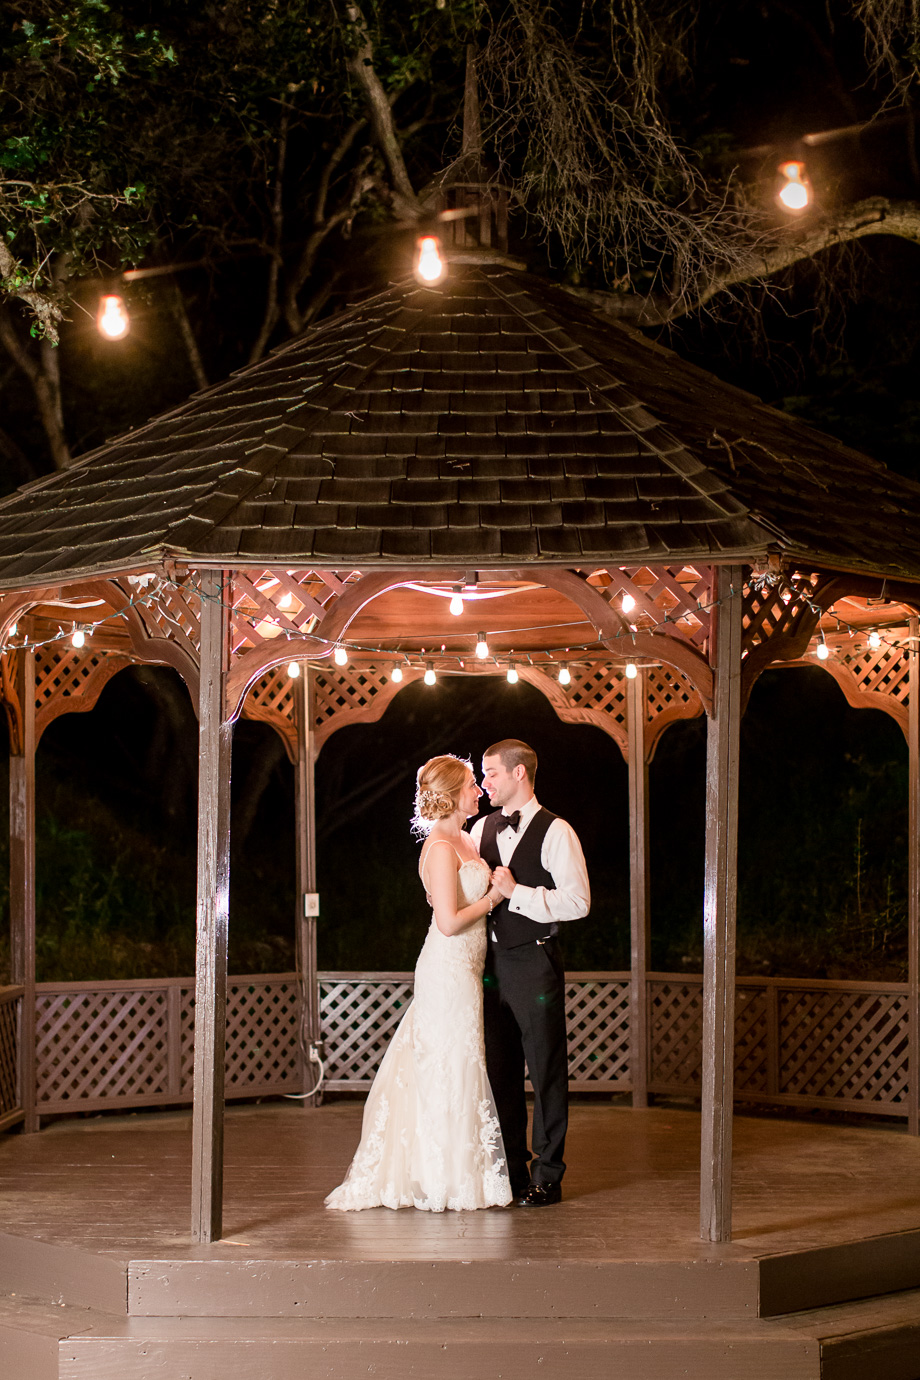 a night shot of the bride and groom at the Elliston Vineyard gazebo by the reception site